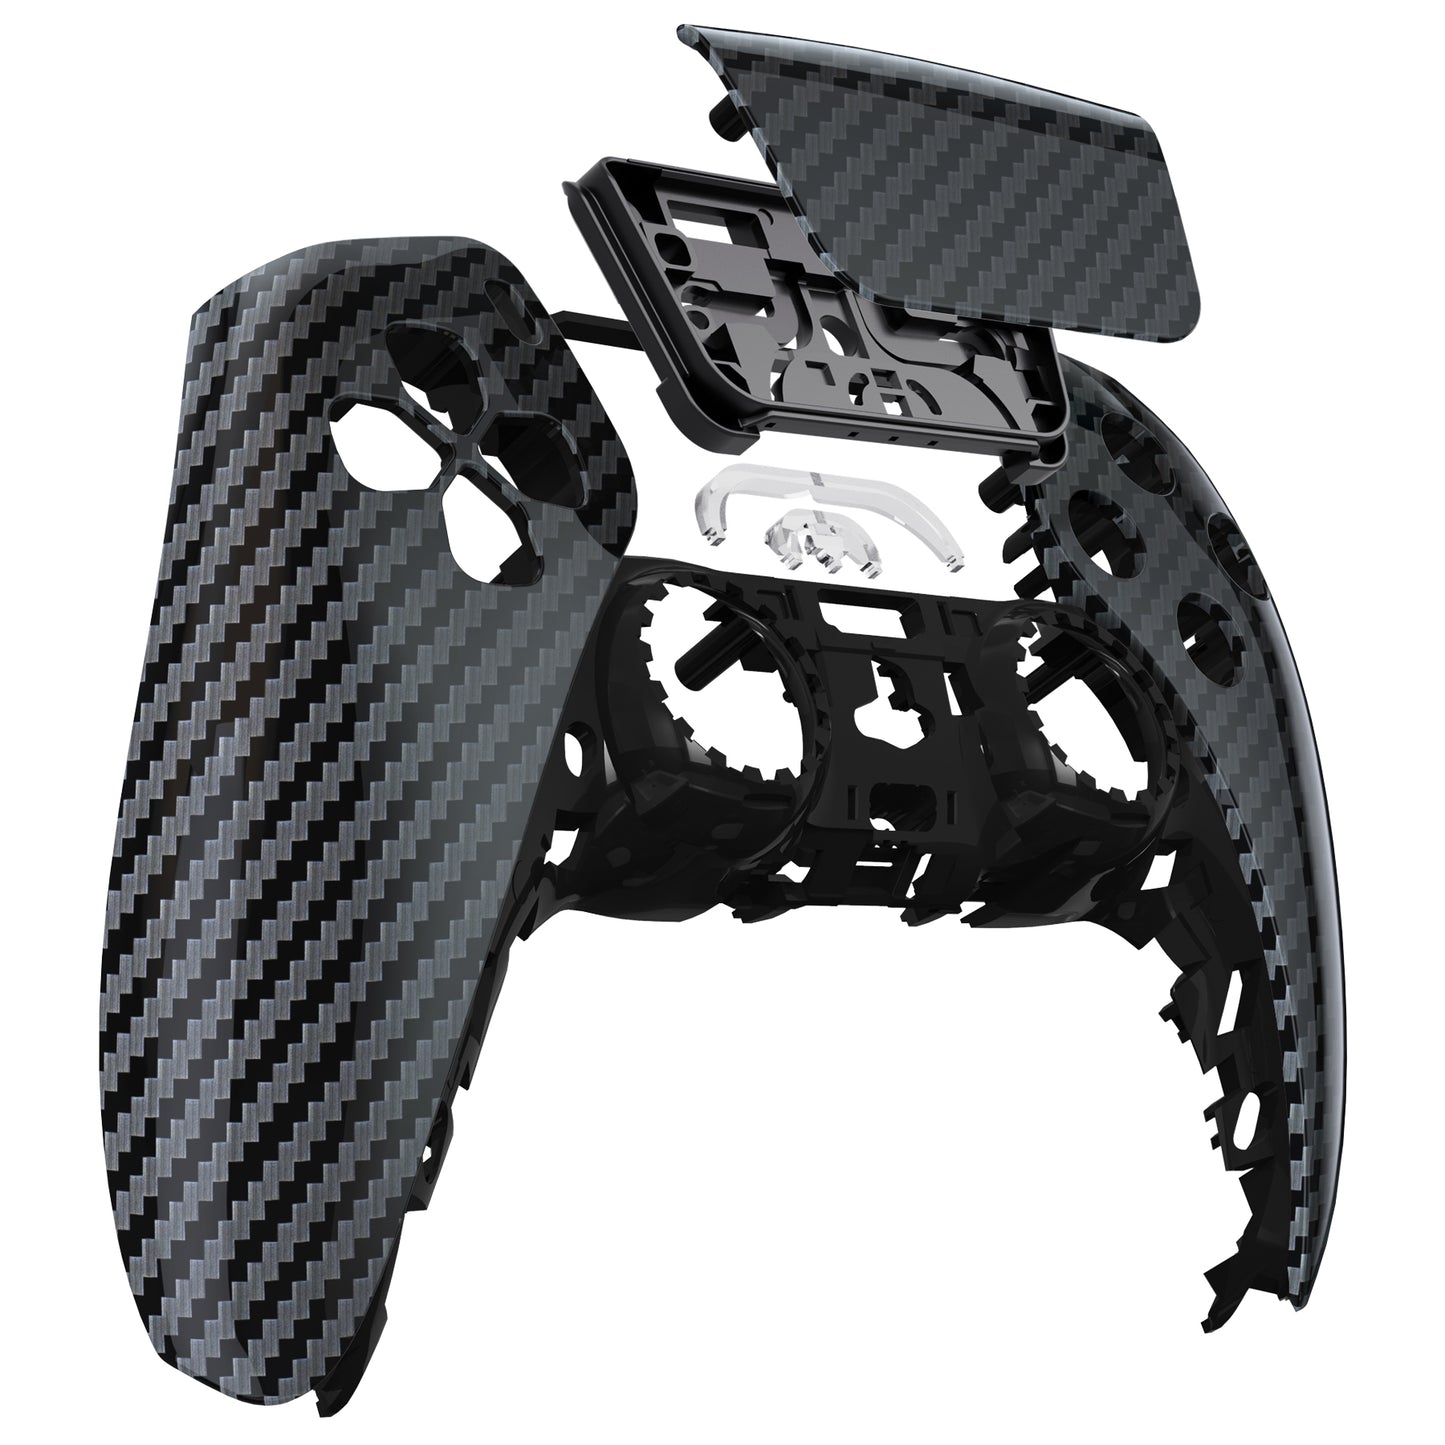 eXtremeRate Retail Graphite Carbon Fiber Pattern Touchpad Front Housing Shell Compatible with ps5 Controller BDM-010 BDM-020 BDM-030, DIY Replacement Shell Custom Touch Pad Cover Compatible with ps5 Controller - ZPFS2005G3